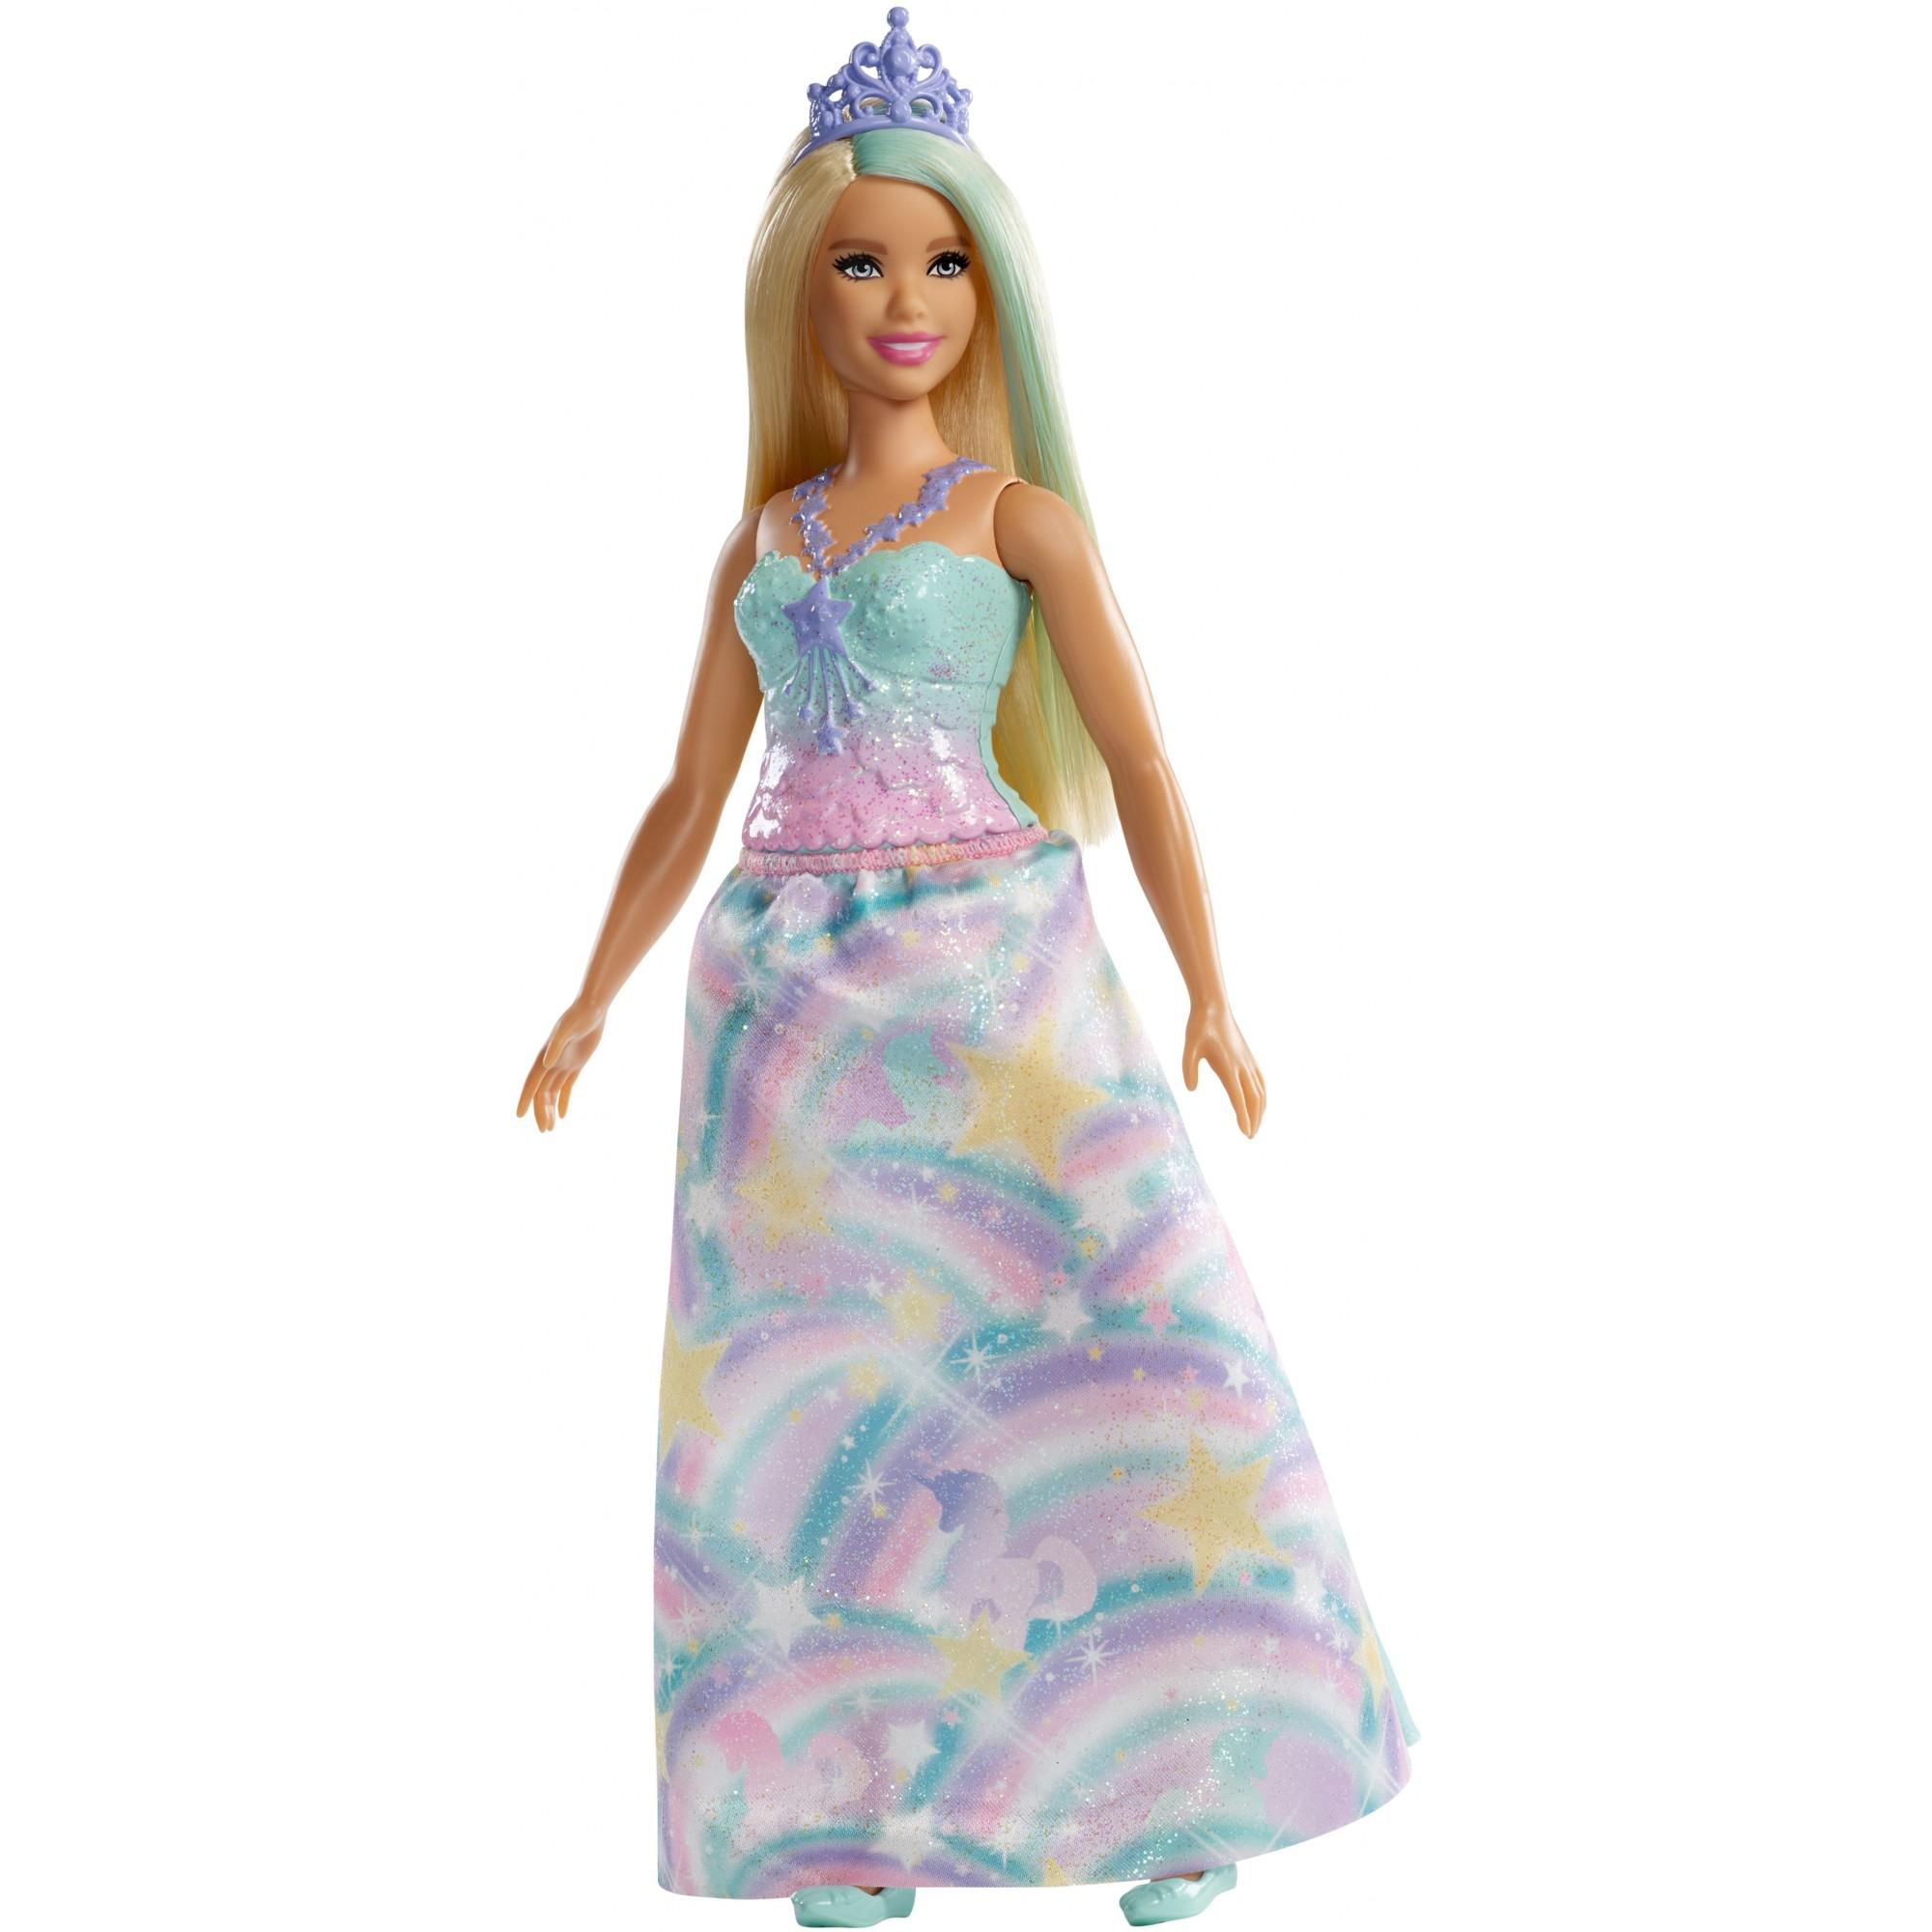 Barbie Dreamtopia Princess Doll, Blonde, Wearing Rainbow-Themed Outfit - image 3 of 7